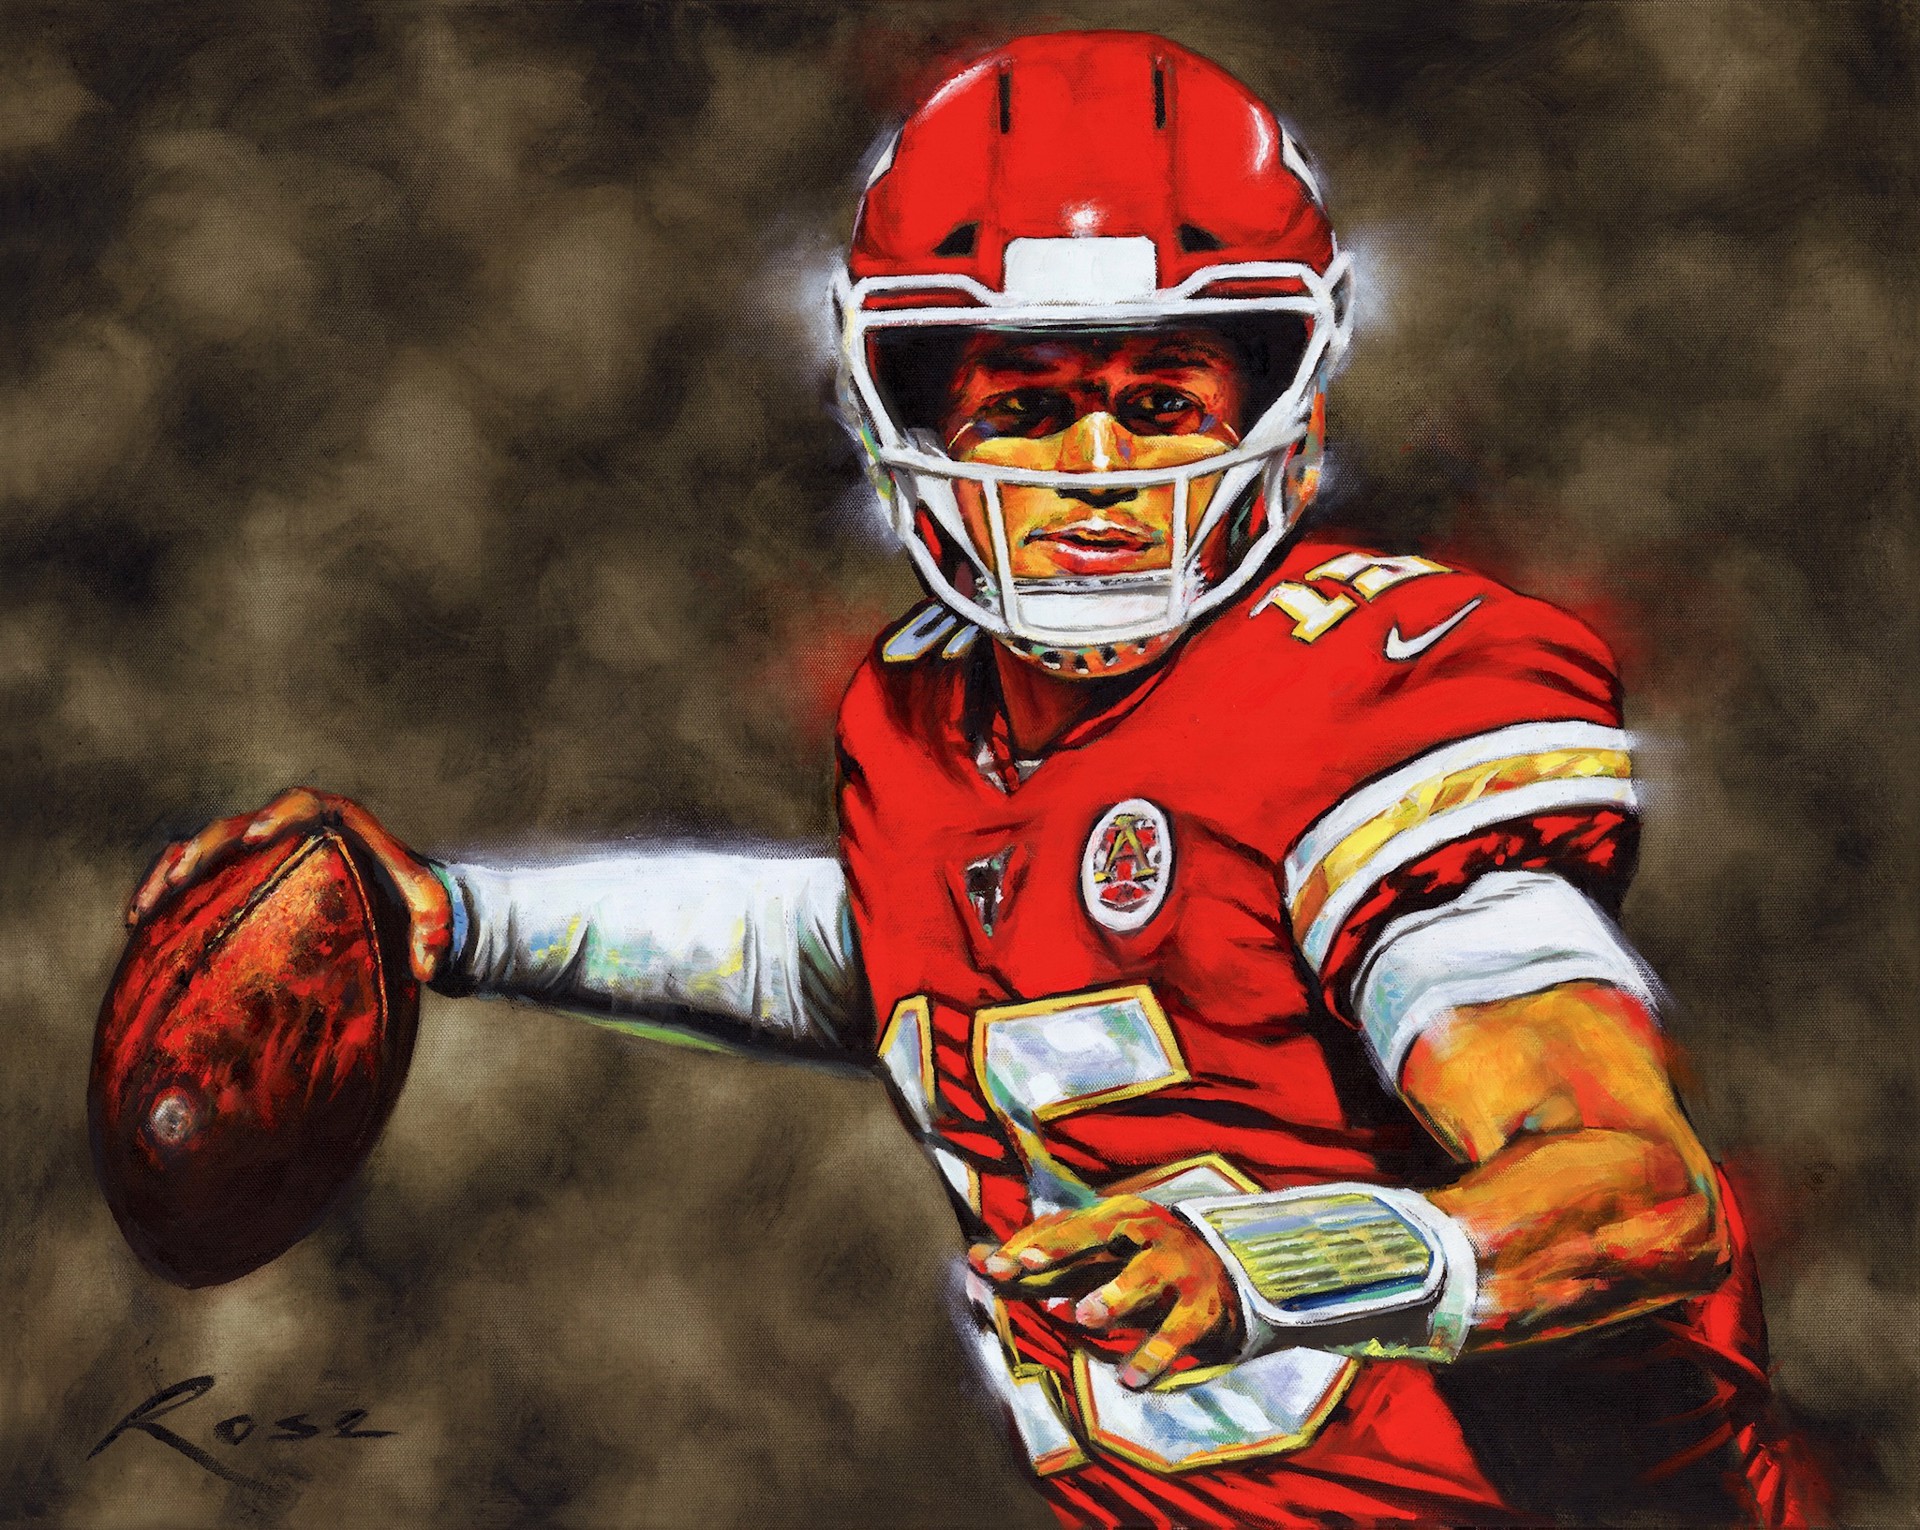 Patrick Mahomes by William Rose Portraits